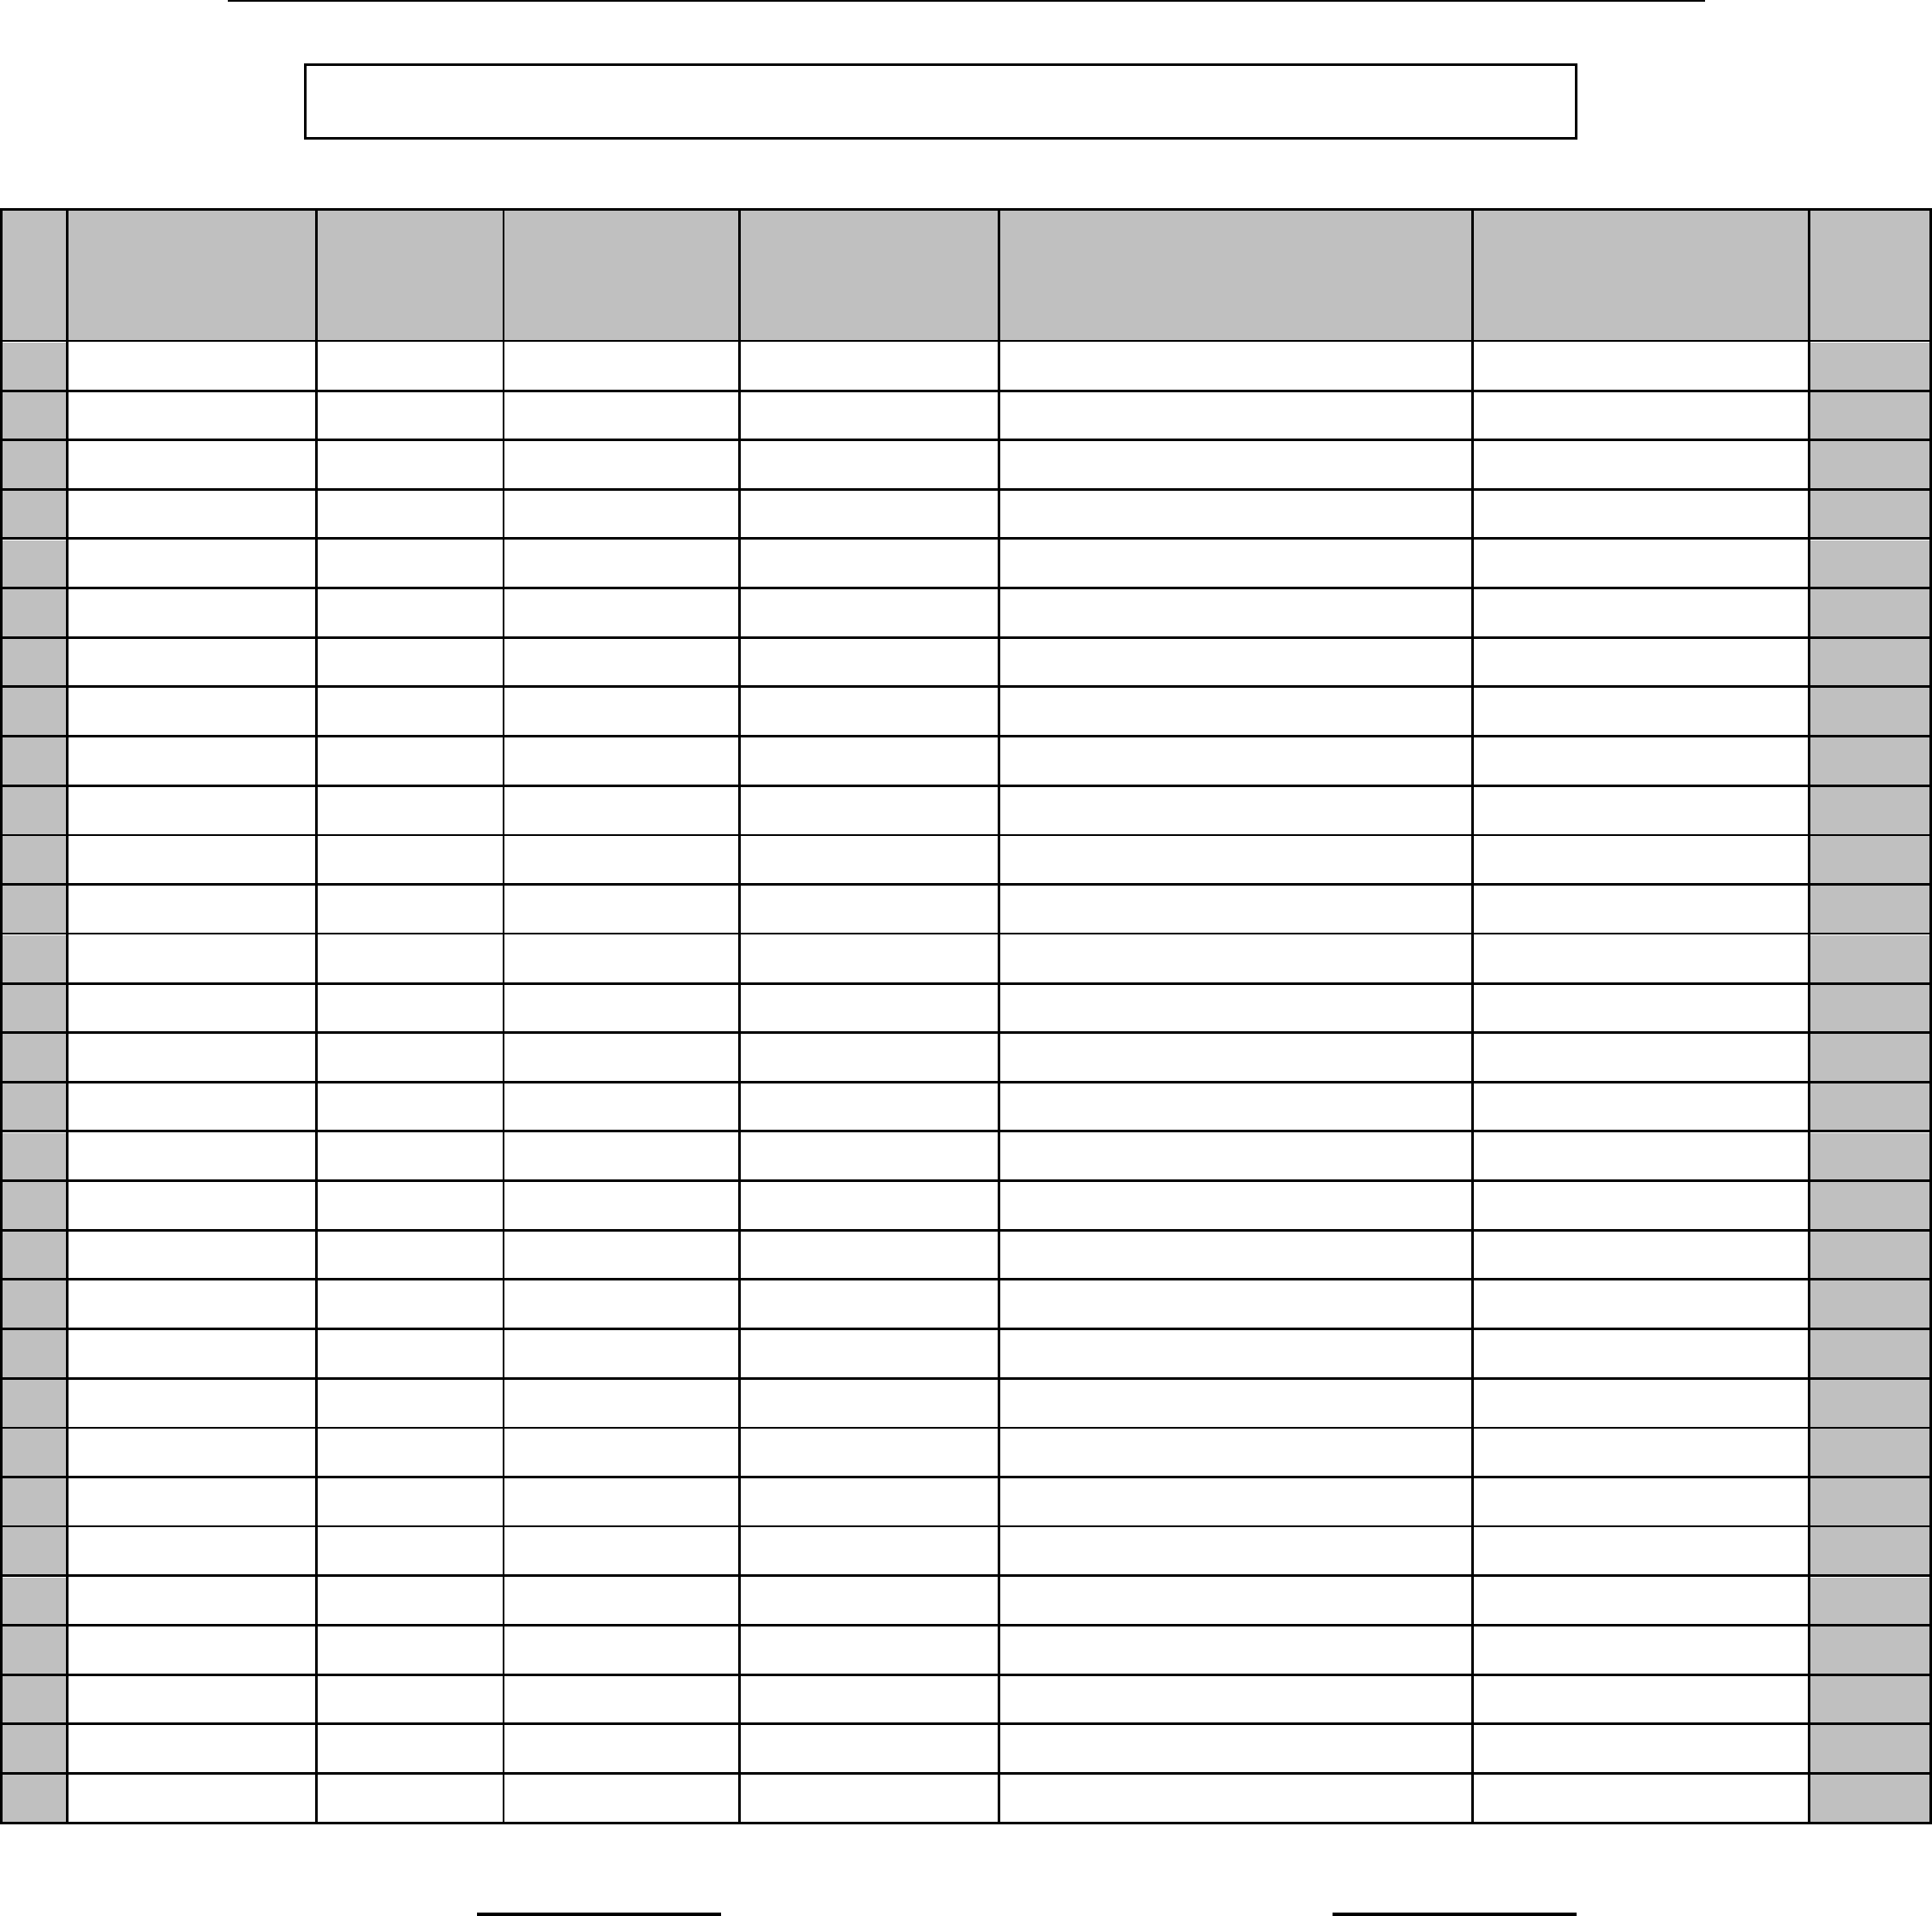 army duty roster excel template